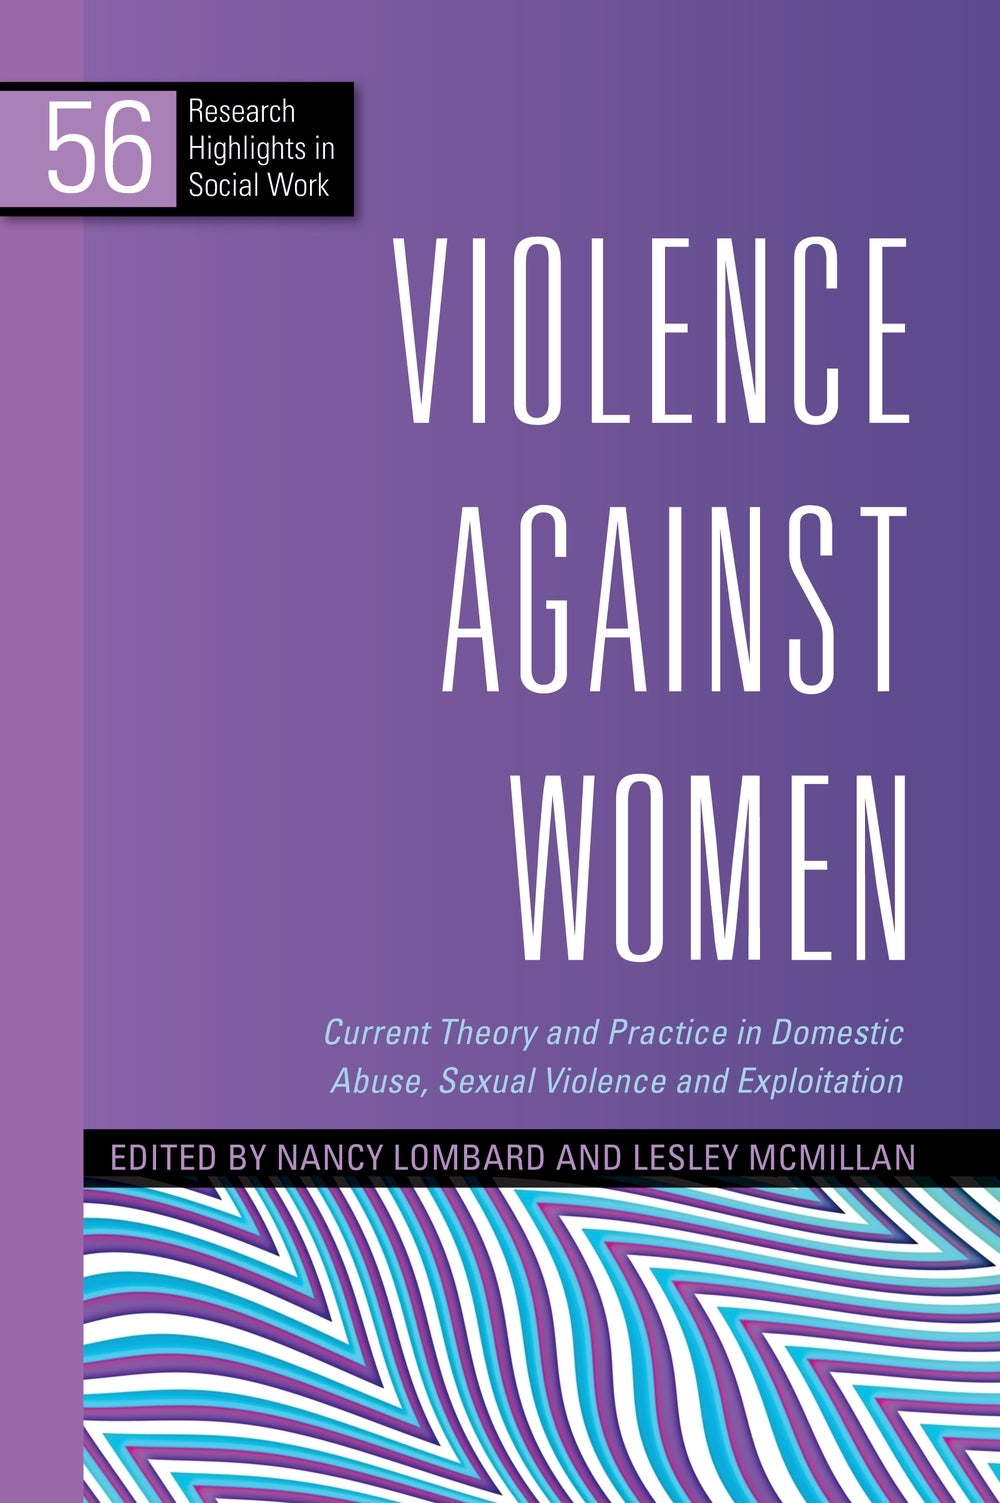 Violence Against Women by Lesley McMillan, Nancy Lombard, No Author Listed